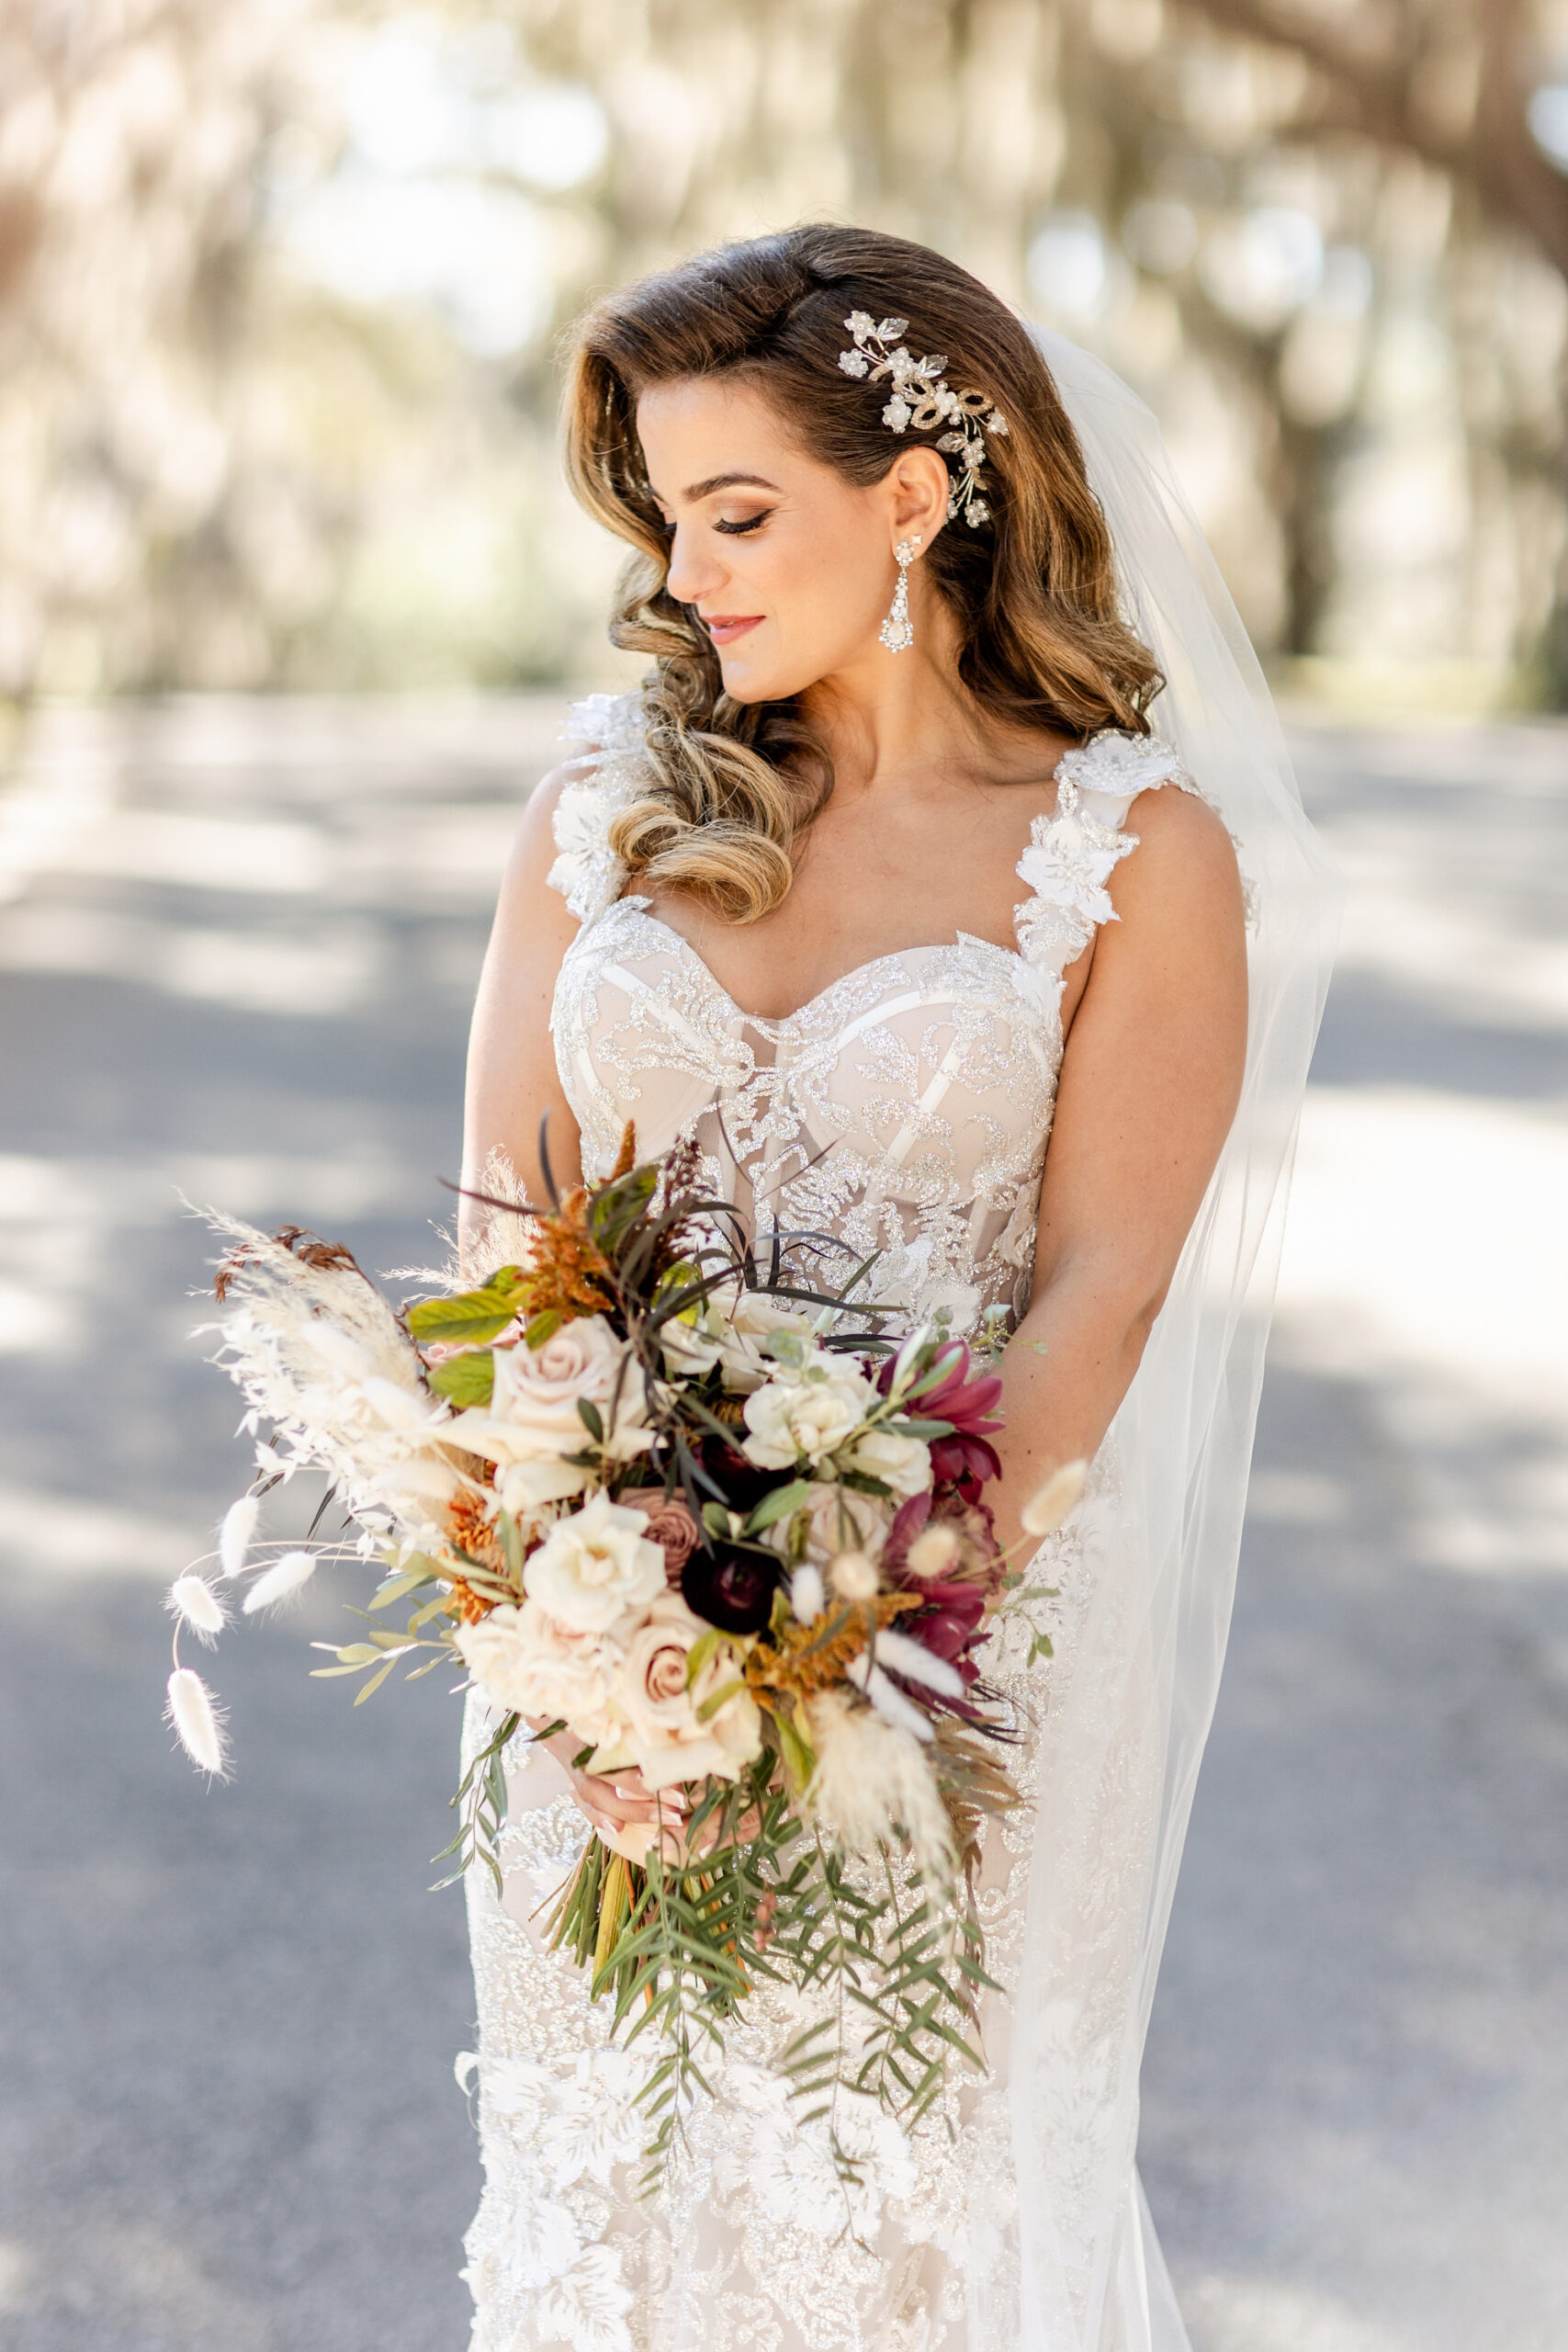 Fall Boho Bride with Side Swept Hair in Crystal Hair Piece Beauty Portrait Holding Burnt Orange, Ivory Roses, Burgundy Flowers, Greenery, Pampas Grass and Dried Leaves Floral Bouquet | Tampa Bay Wedding Hair and Makeup Femme Akoi Beauty Studio